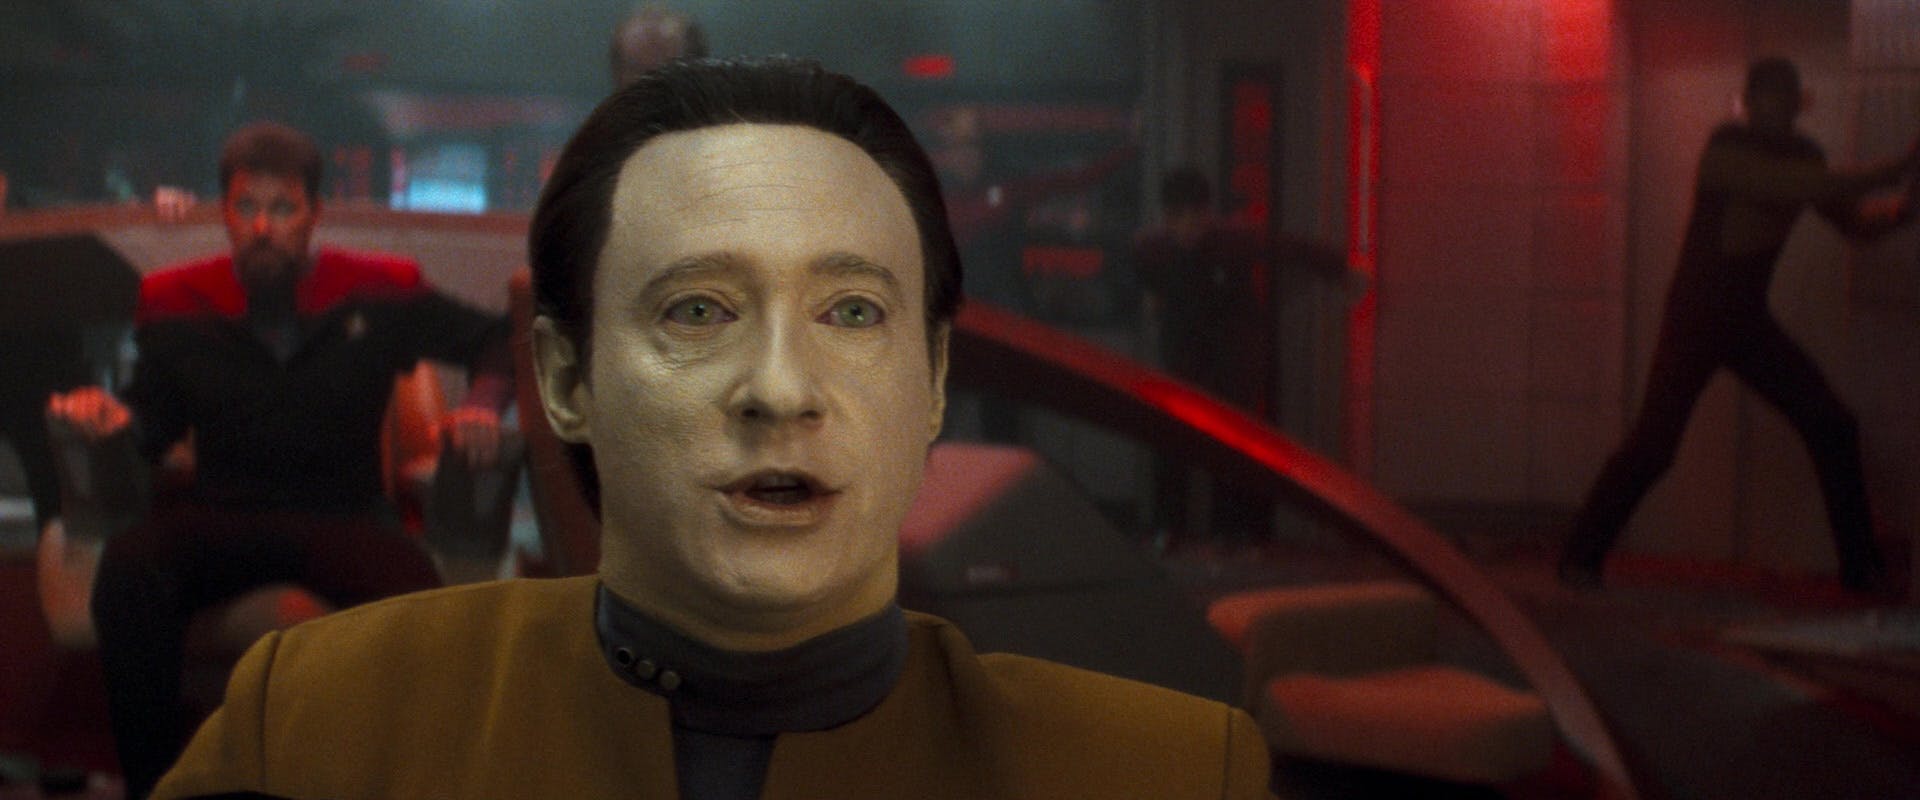 While Riker sits in the command chair and the Enterprise crew braces for its crash landing on Veridian III, Data (with an emotion chip) reacts to the scene as it unfolds in Star Trek Generations